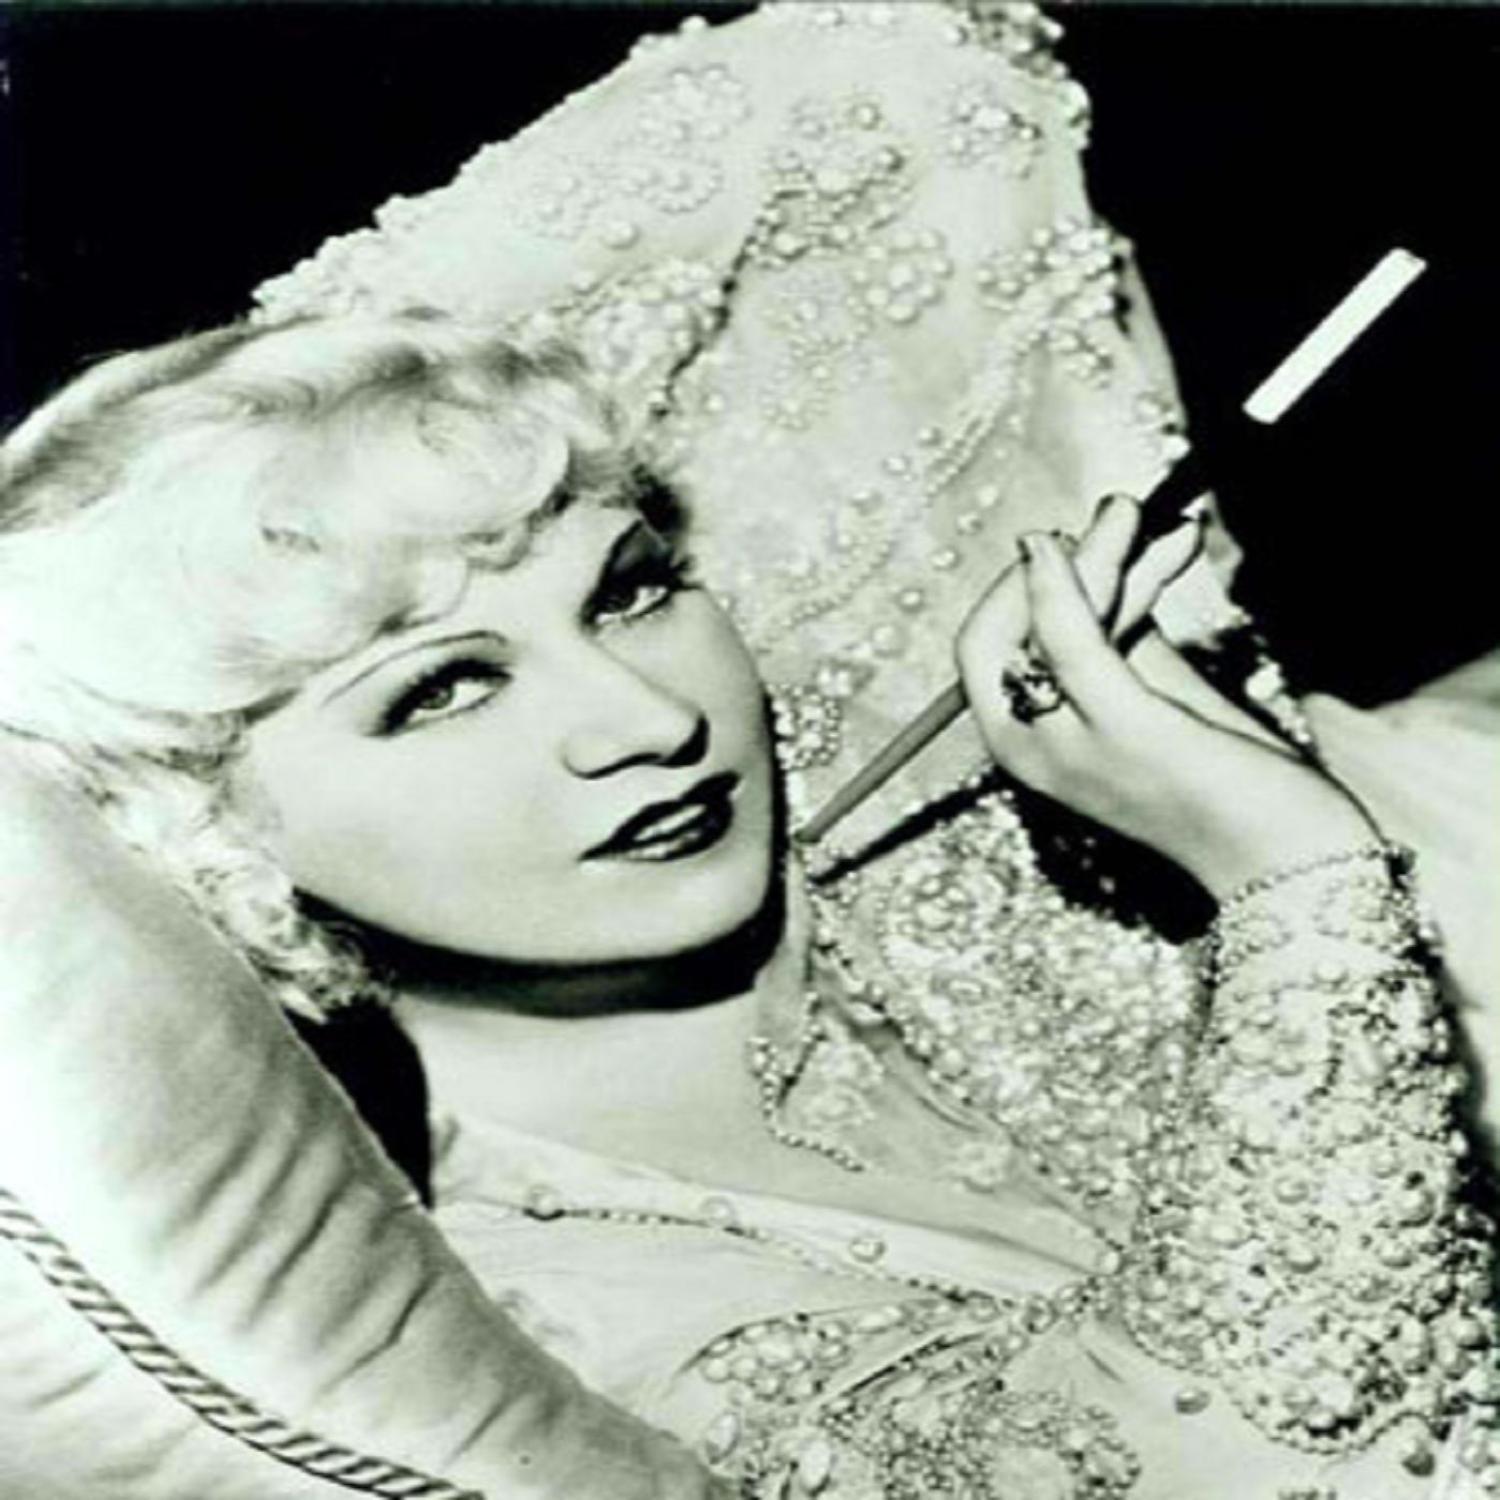 Mae West - They Called Me Mister Honky Tonky